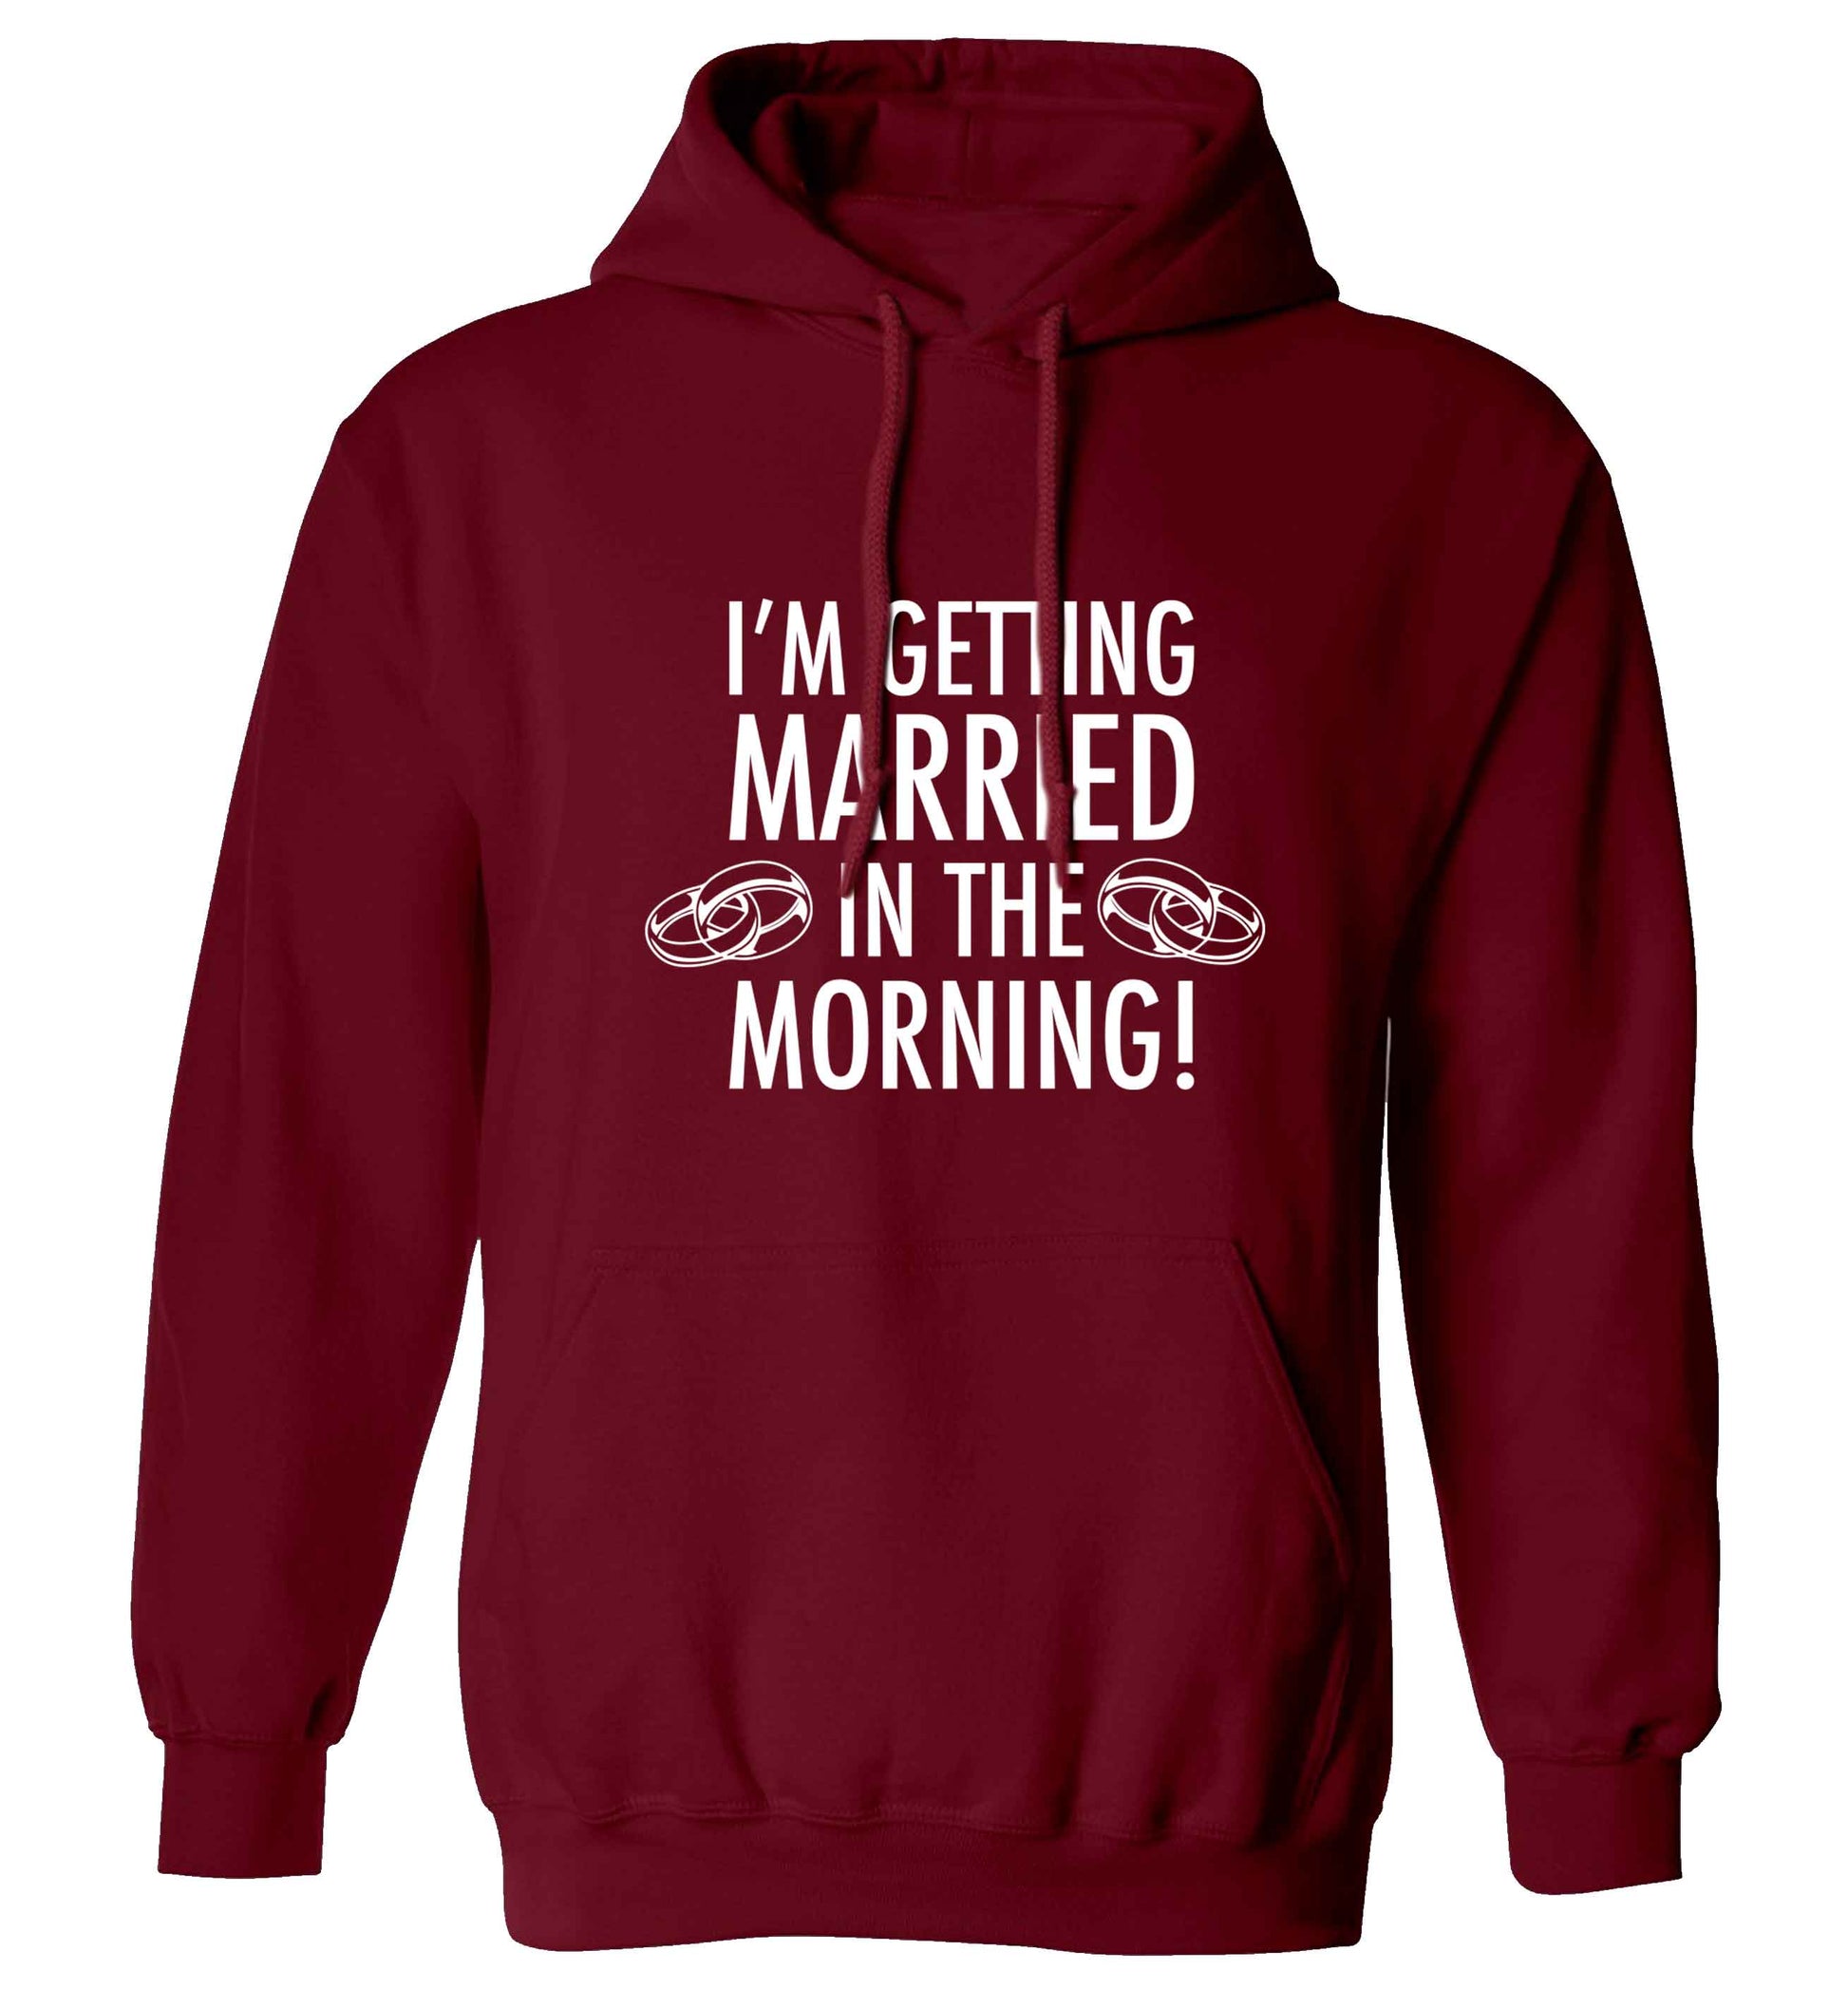 I'm getting married in the morning! adults unisex maroon hoodie 2XL